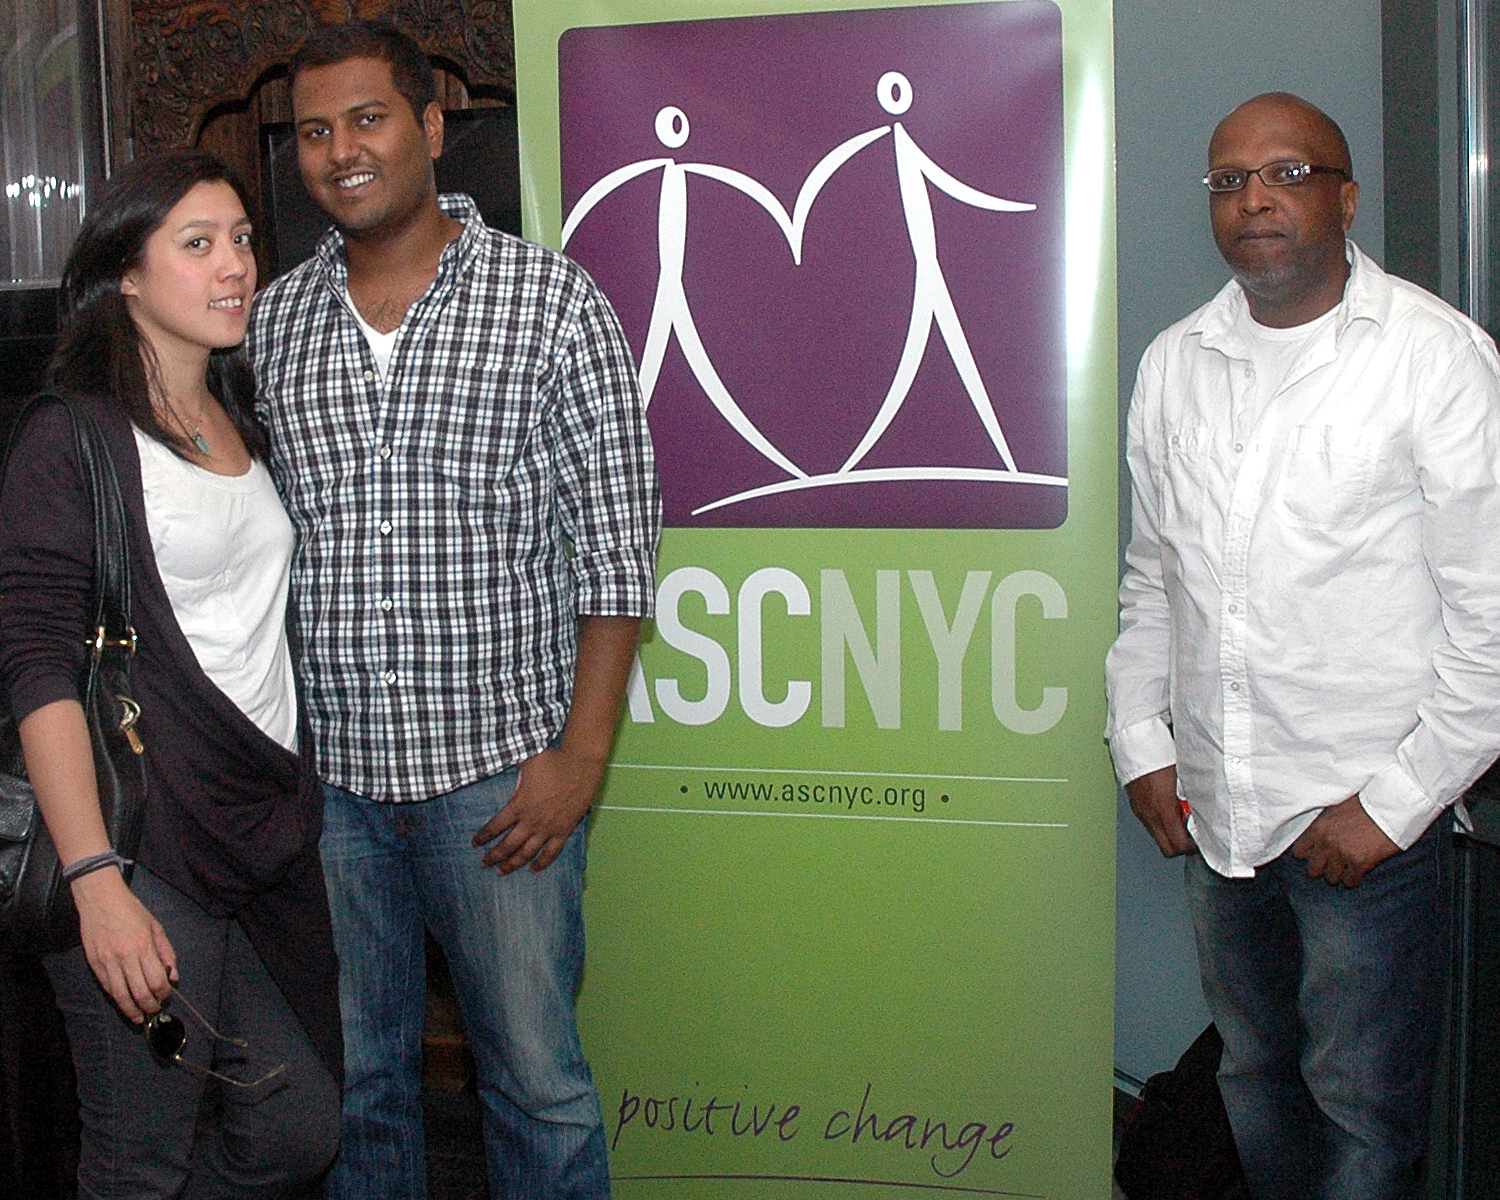 ASCNYC Staff Stephen Sukumaran and Guy Williams with Guest Paloma Woo